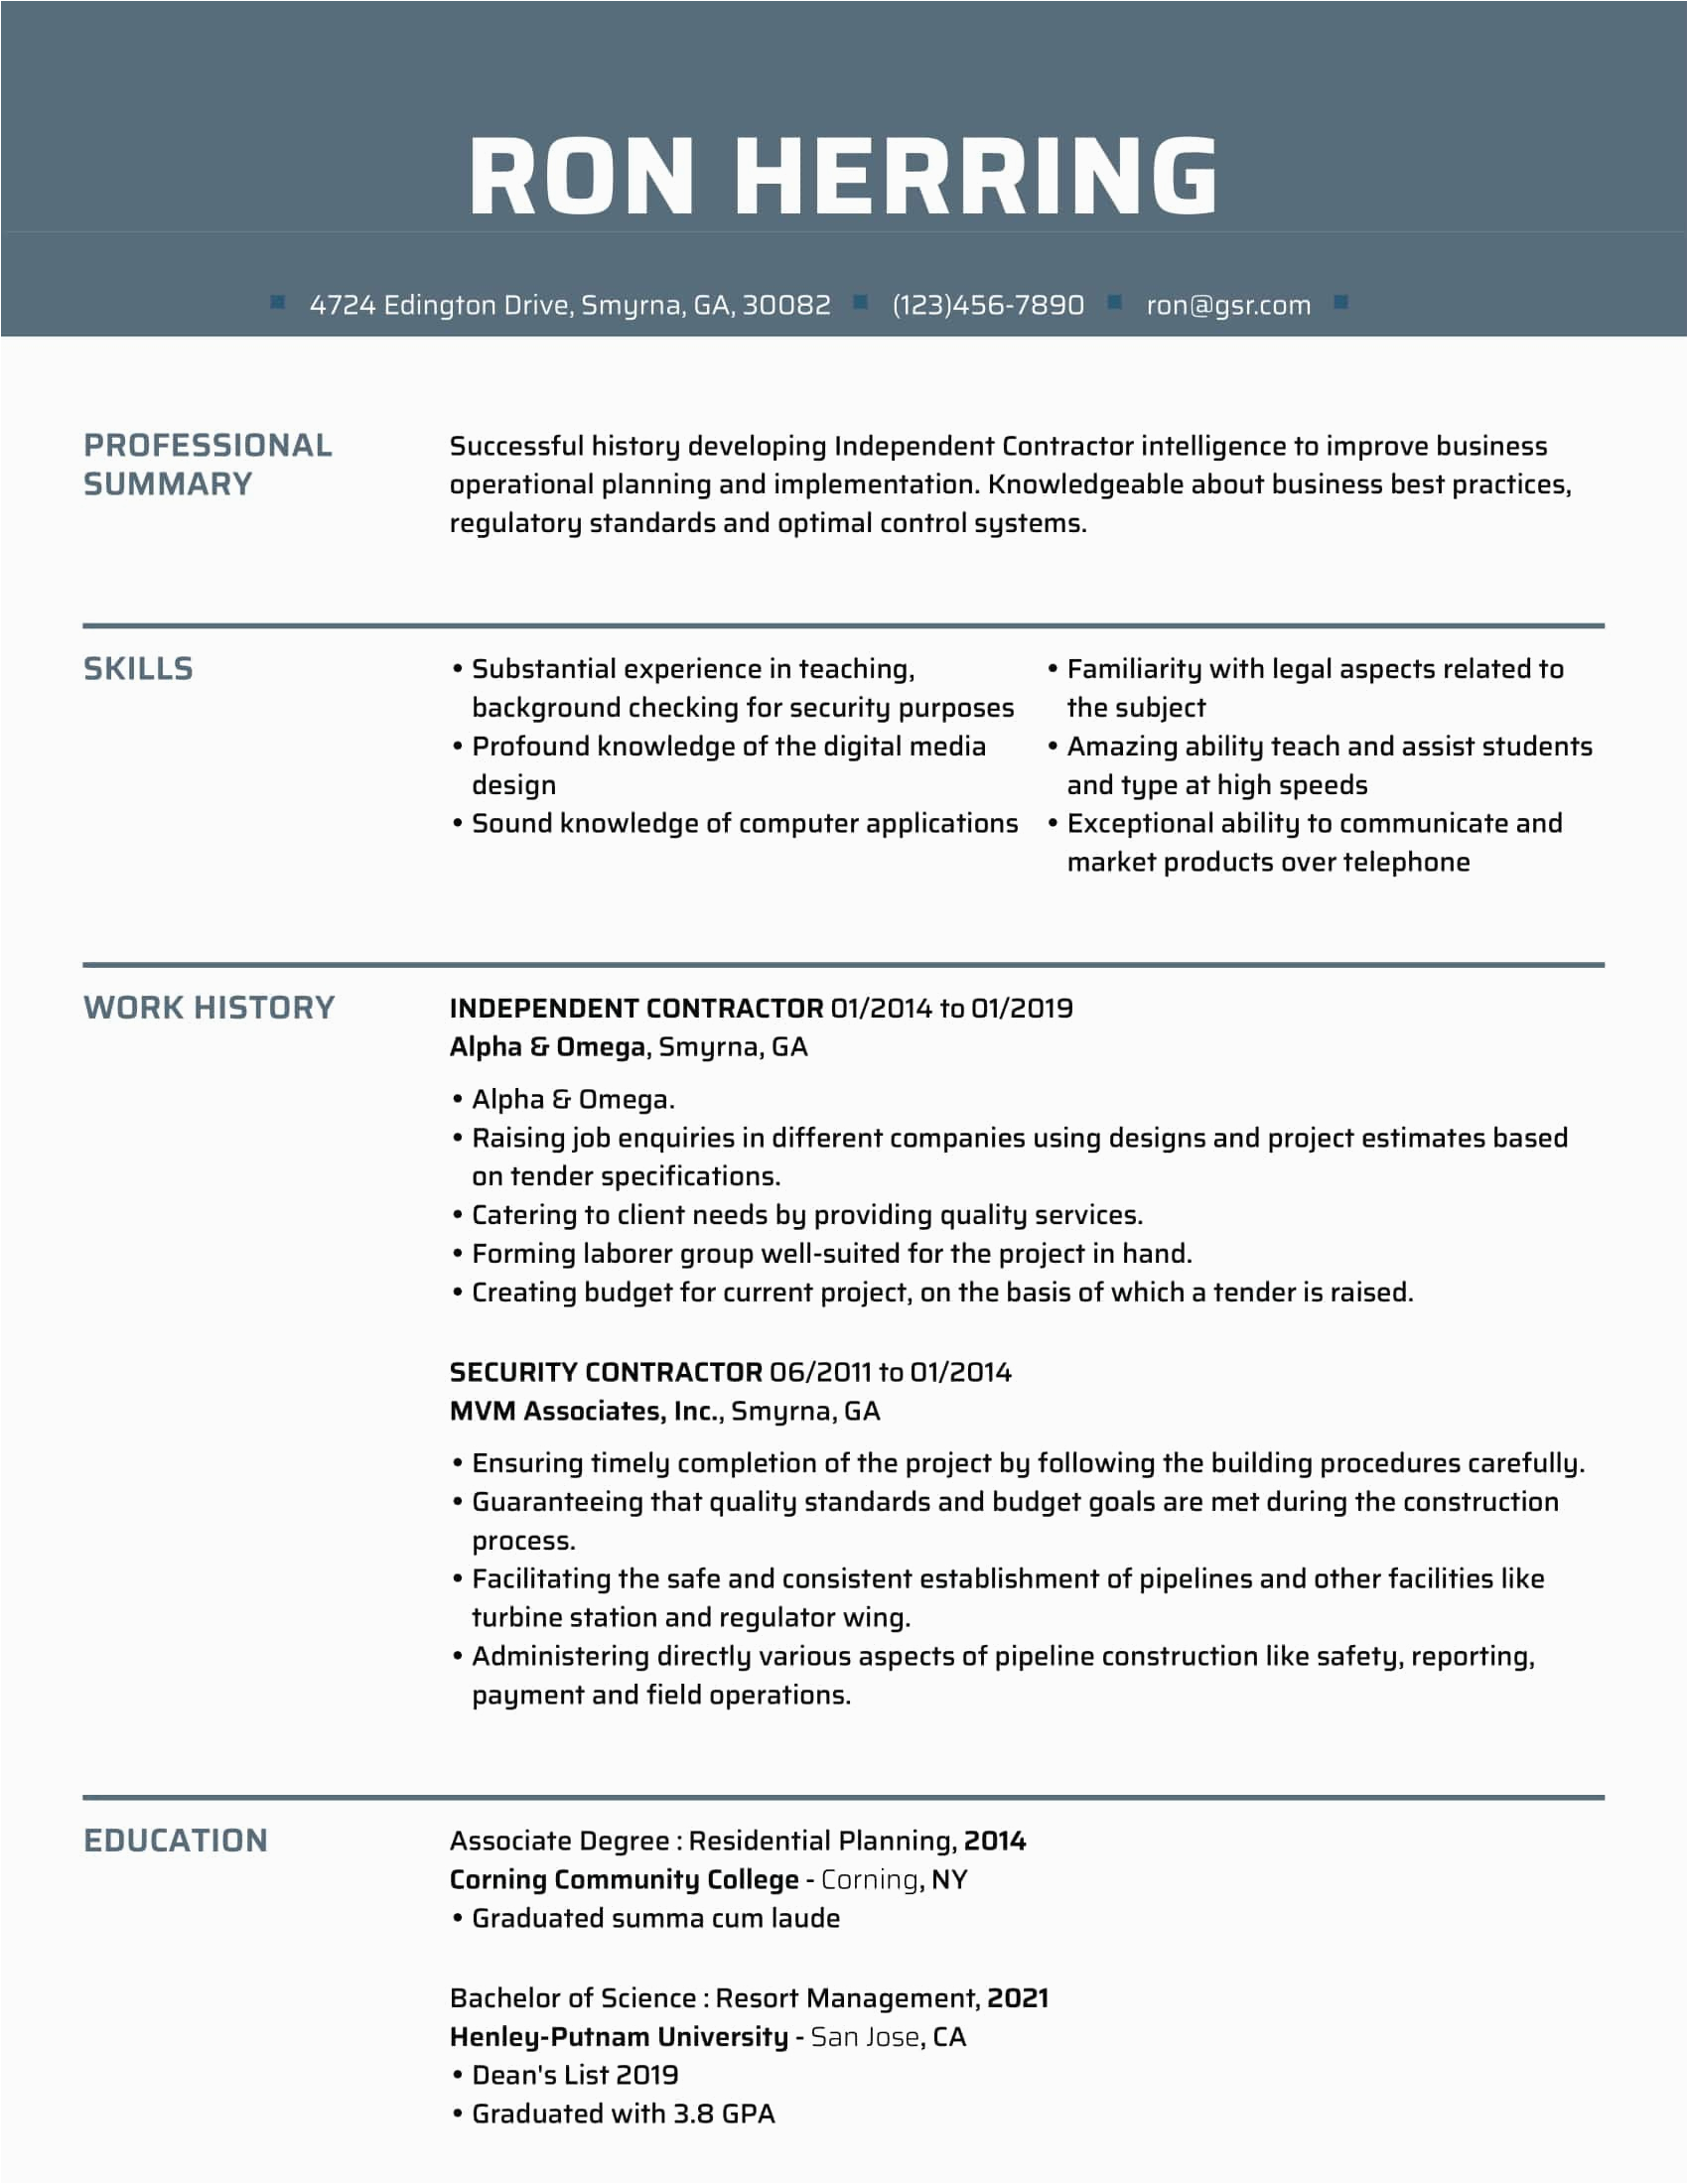 Sample Resume format that Can Be Edited 2022 Resume Templates Edit & Download In Minutes